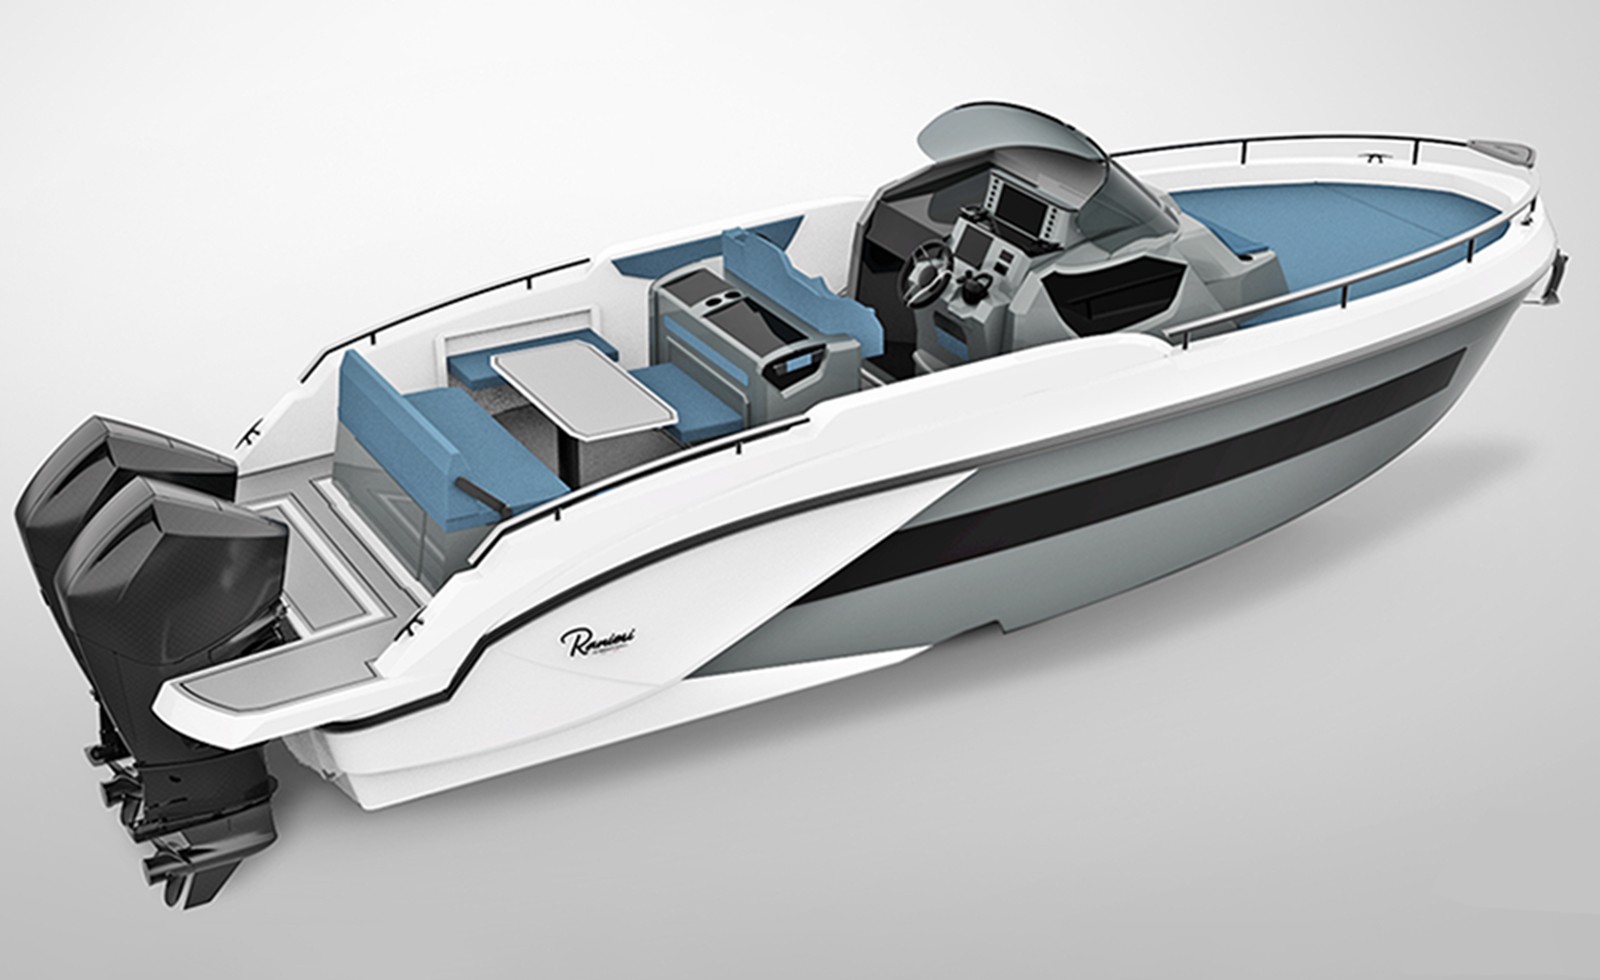 Ranieri International has recently launched its new cabin cruiser, the NEXT 275 LX